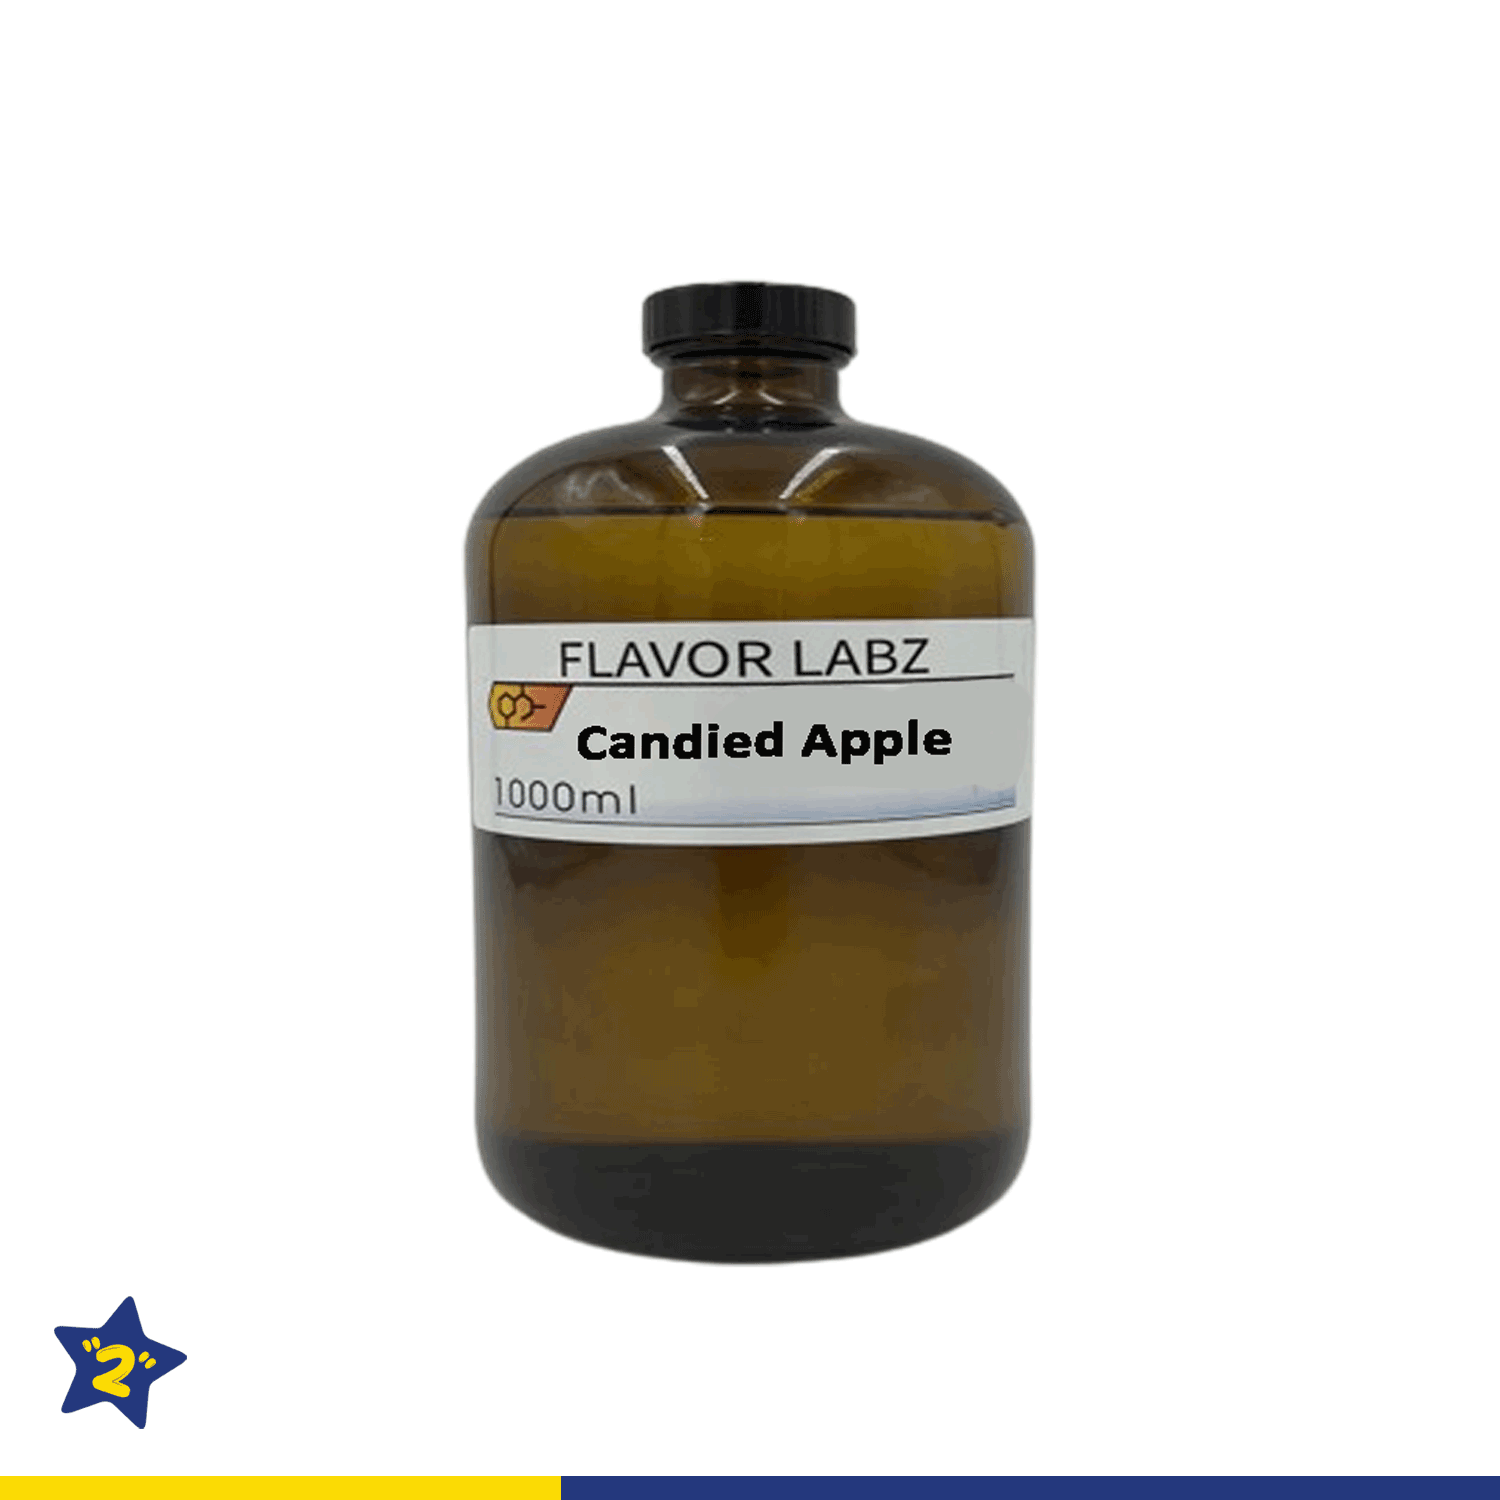 FlavorLabs Fruity Flavor Candied Apple